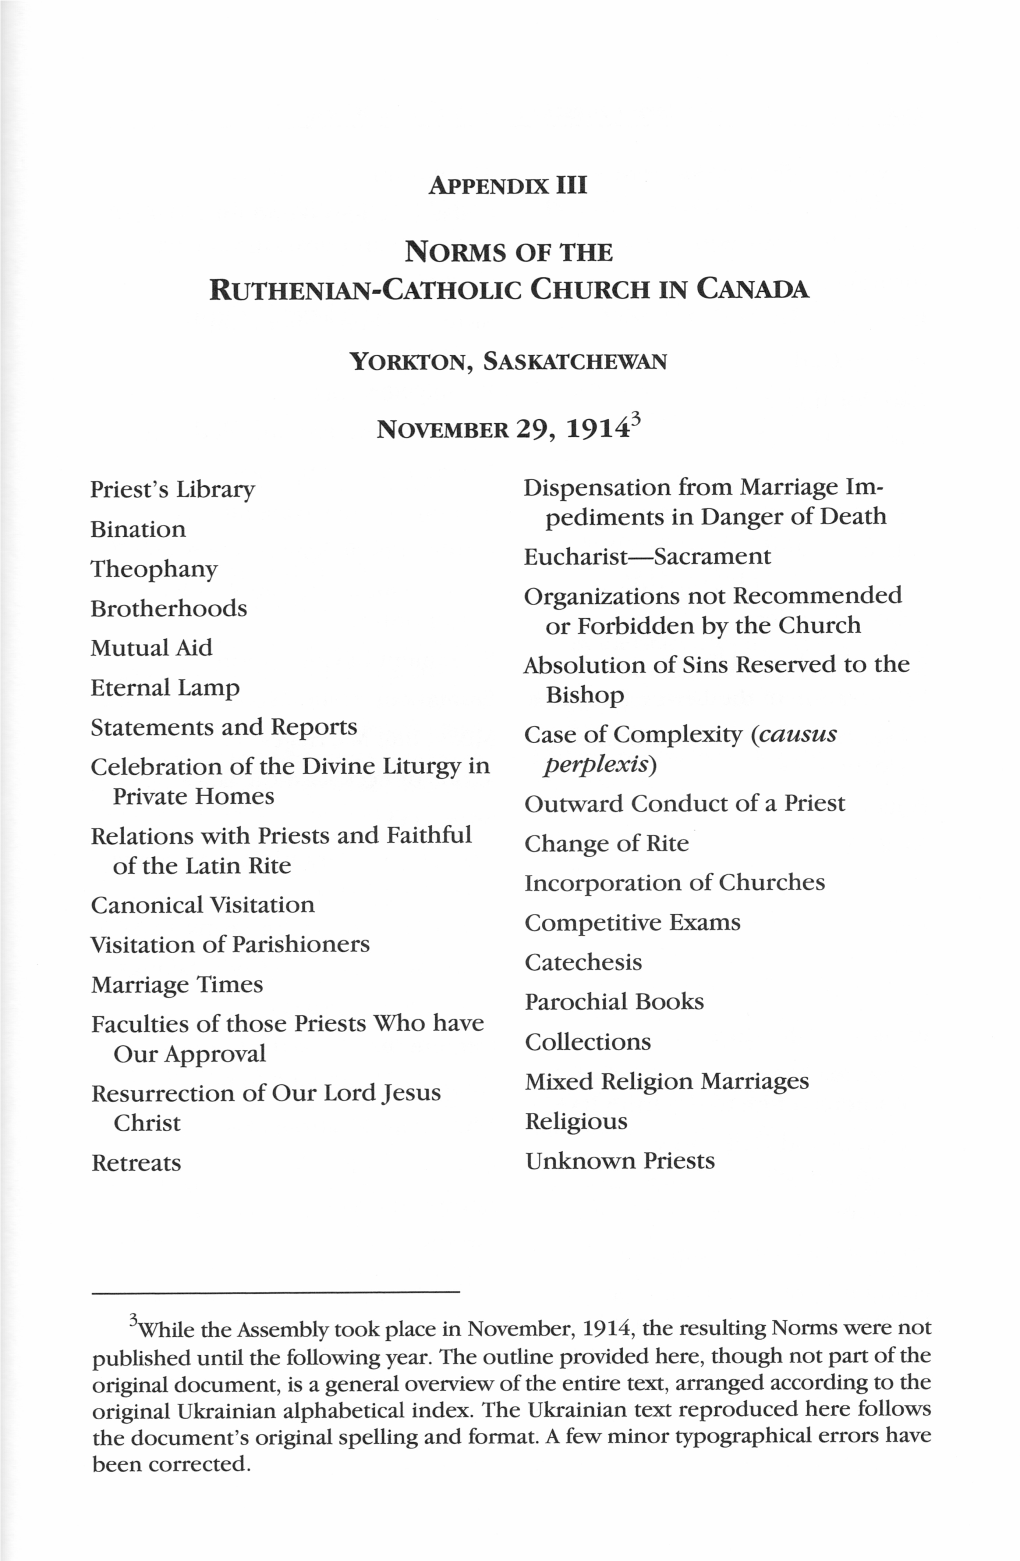 Norms of the Ruthenian-Catholic Church in Canada